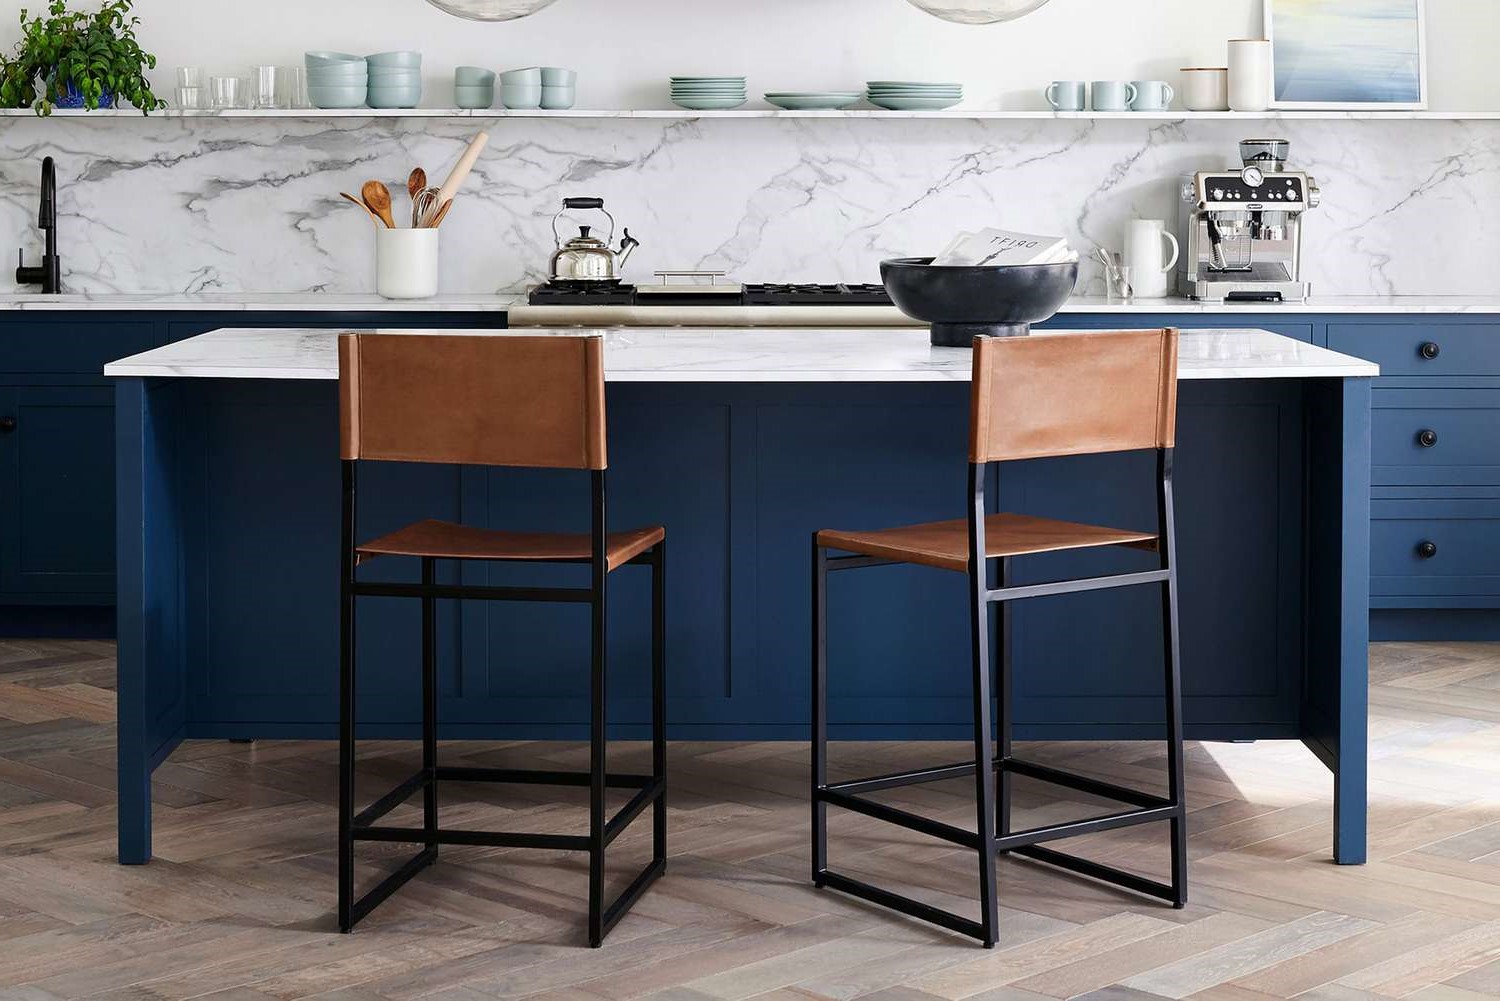 DIY Barstools: Transform Your Space With Stylish And Affordable Seating